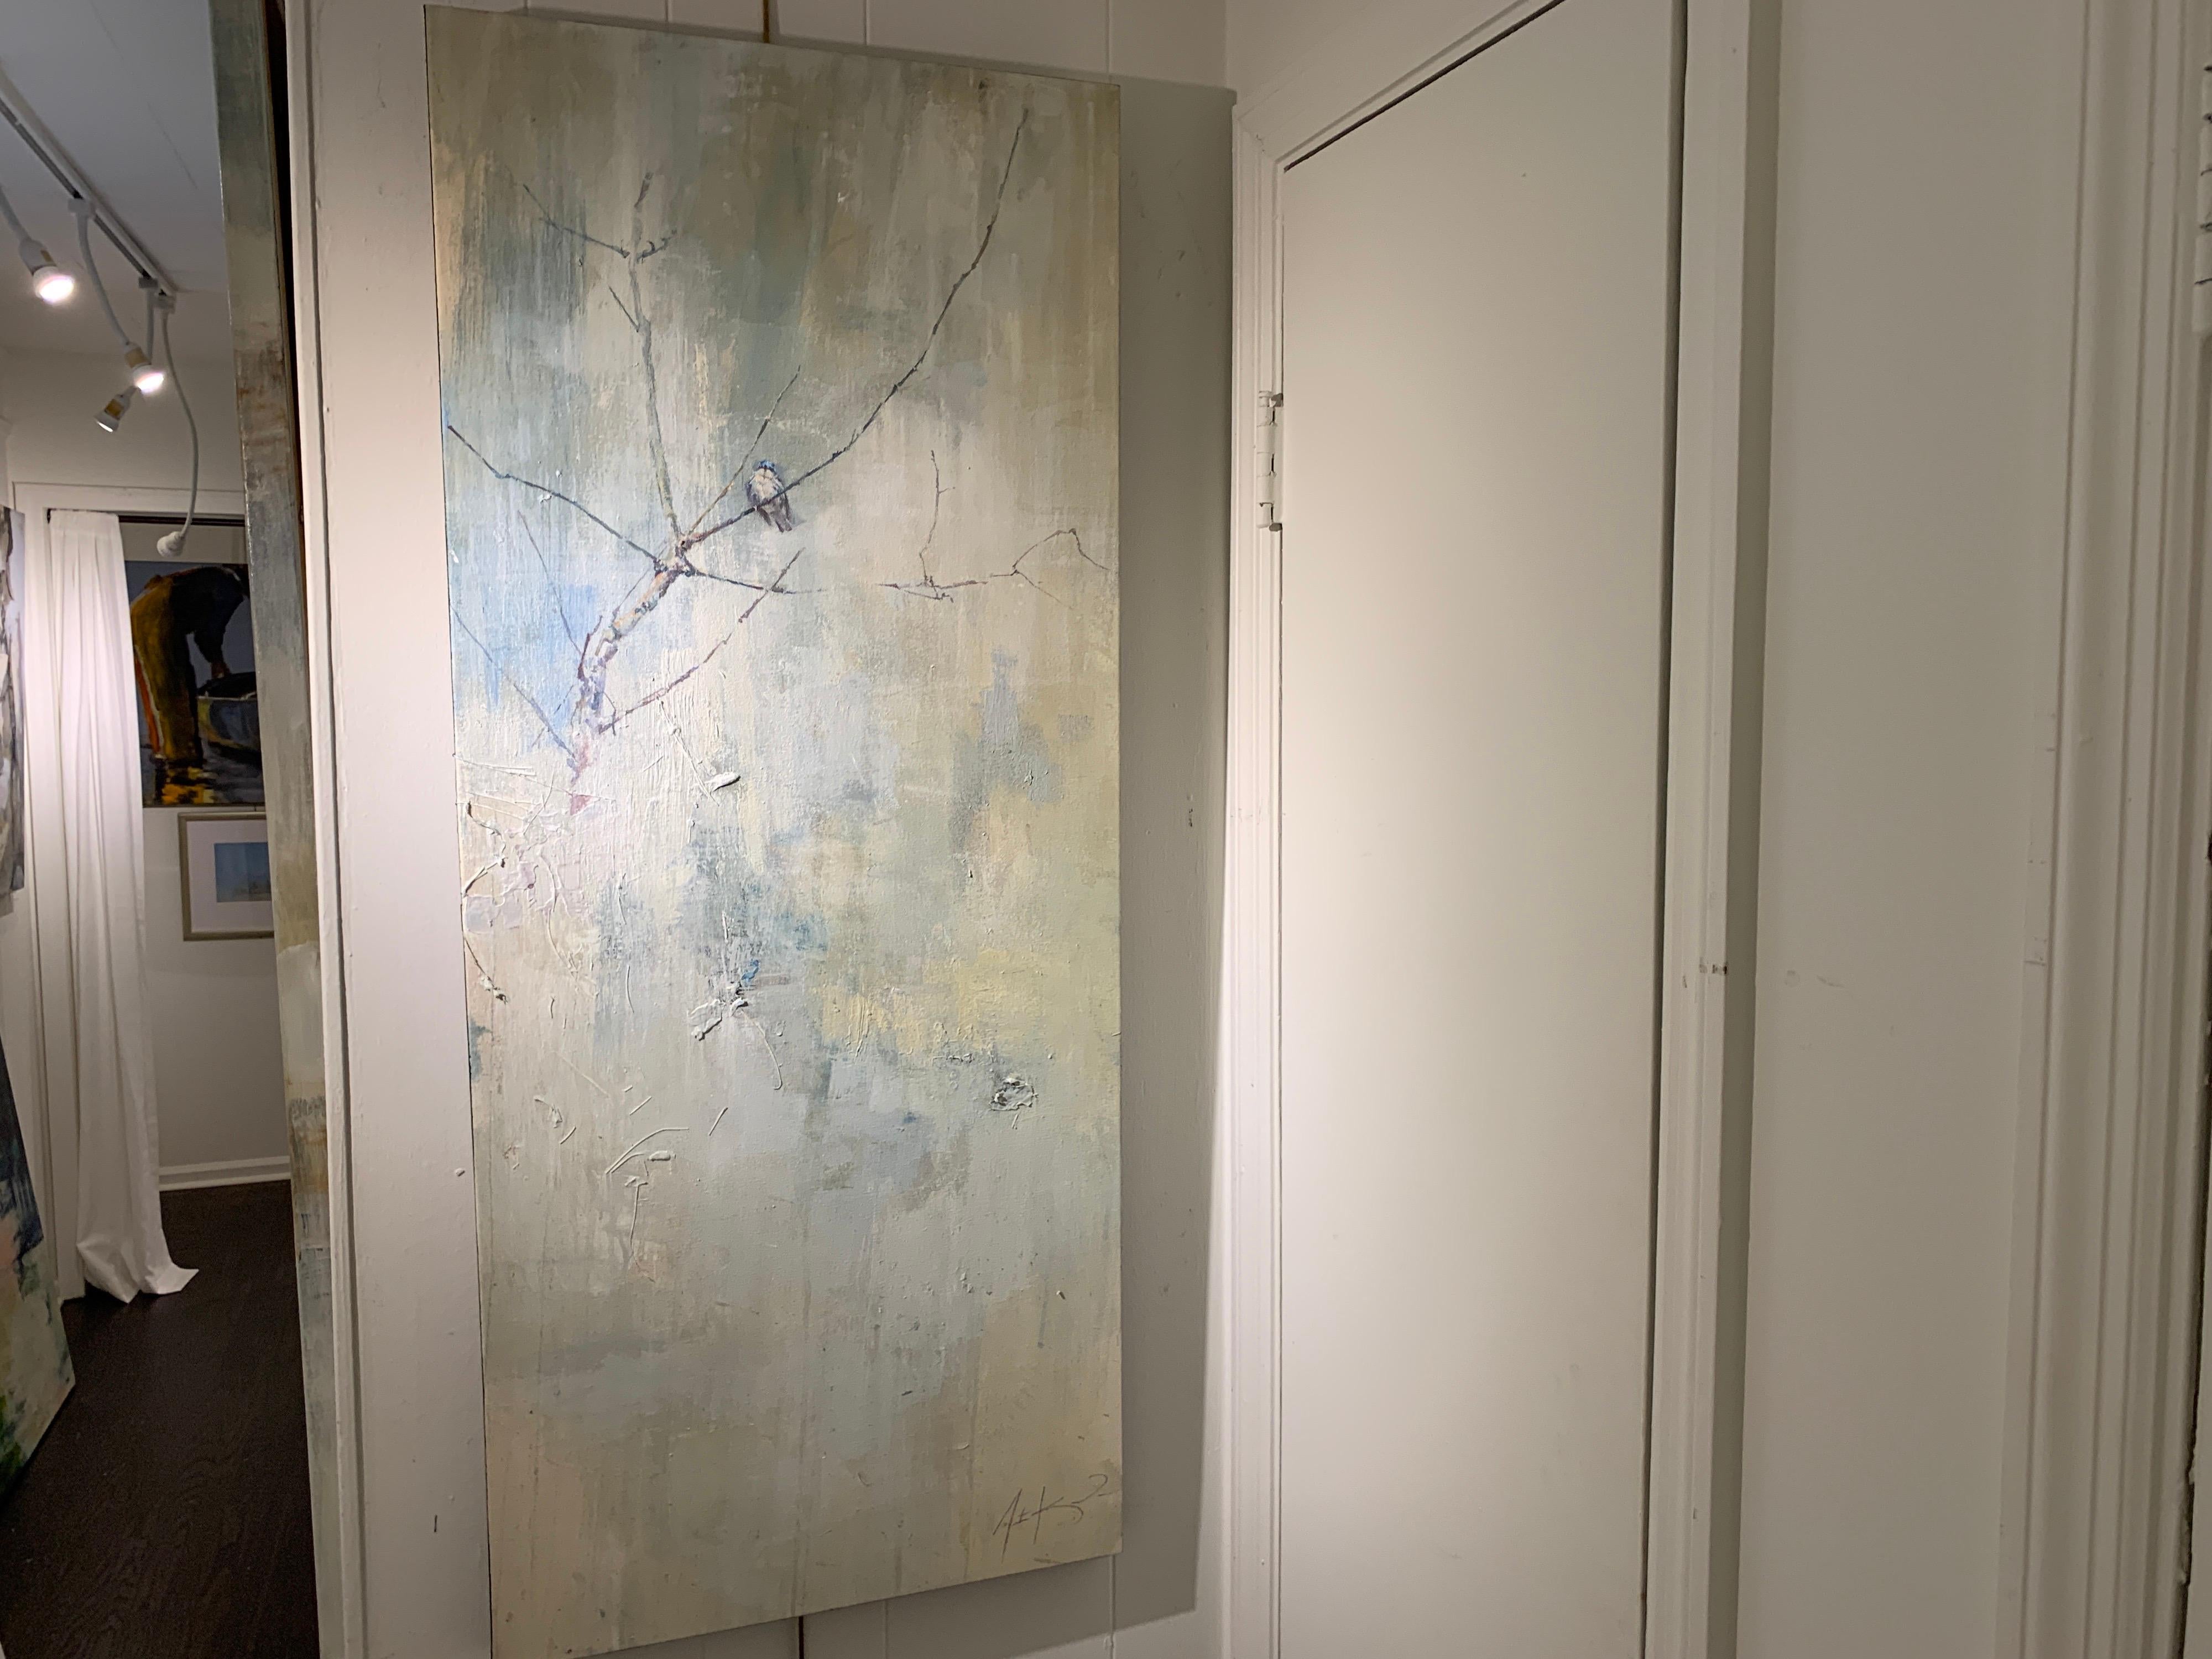 'Impending Rain, A Welcome Idea (Cape-may Warbler)' is a large vertical mixed media on canvas abstract painting created by American artist Justin Kellner in 2020. Featuring a palette made of blue, beige, grey, and green, the painting presents an